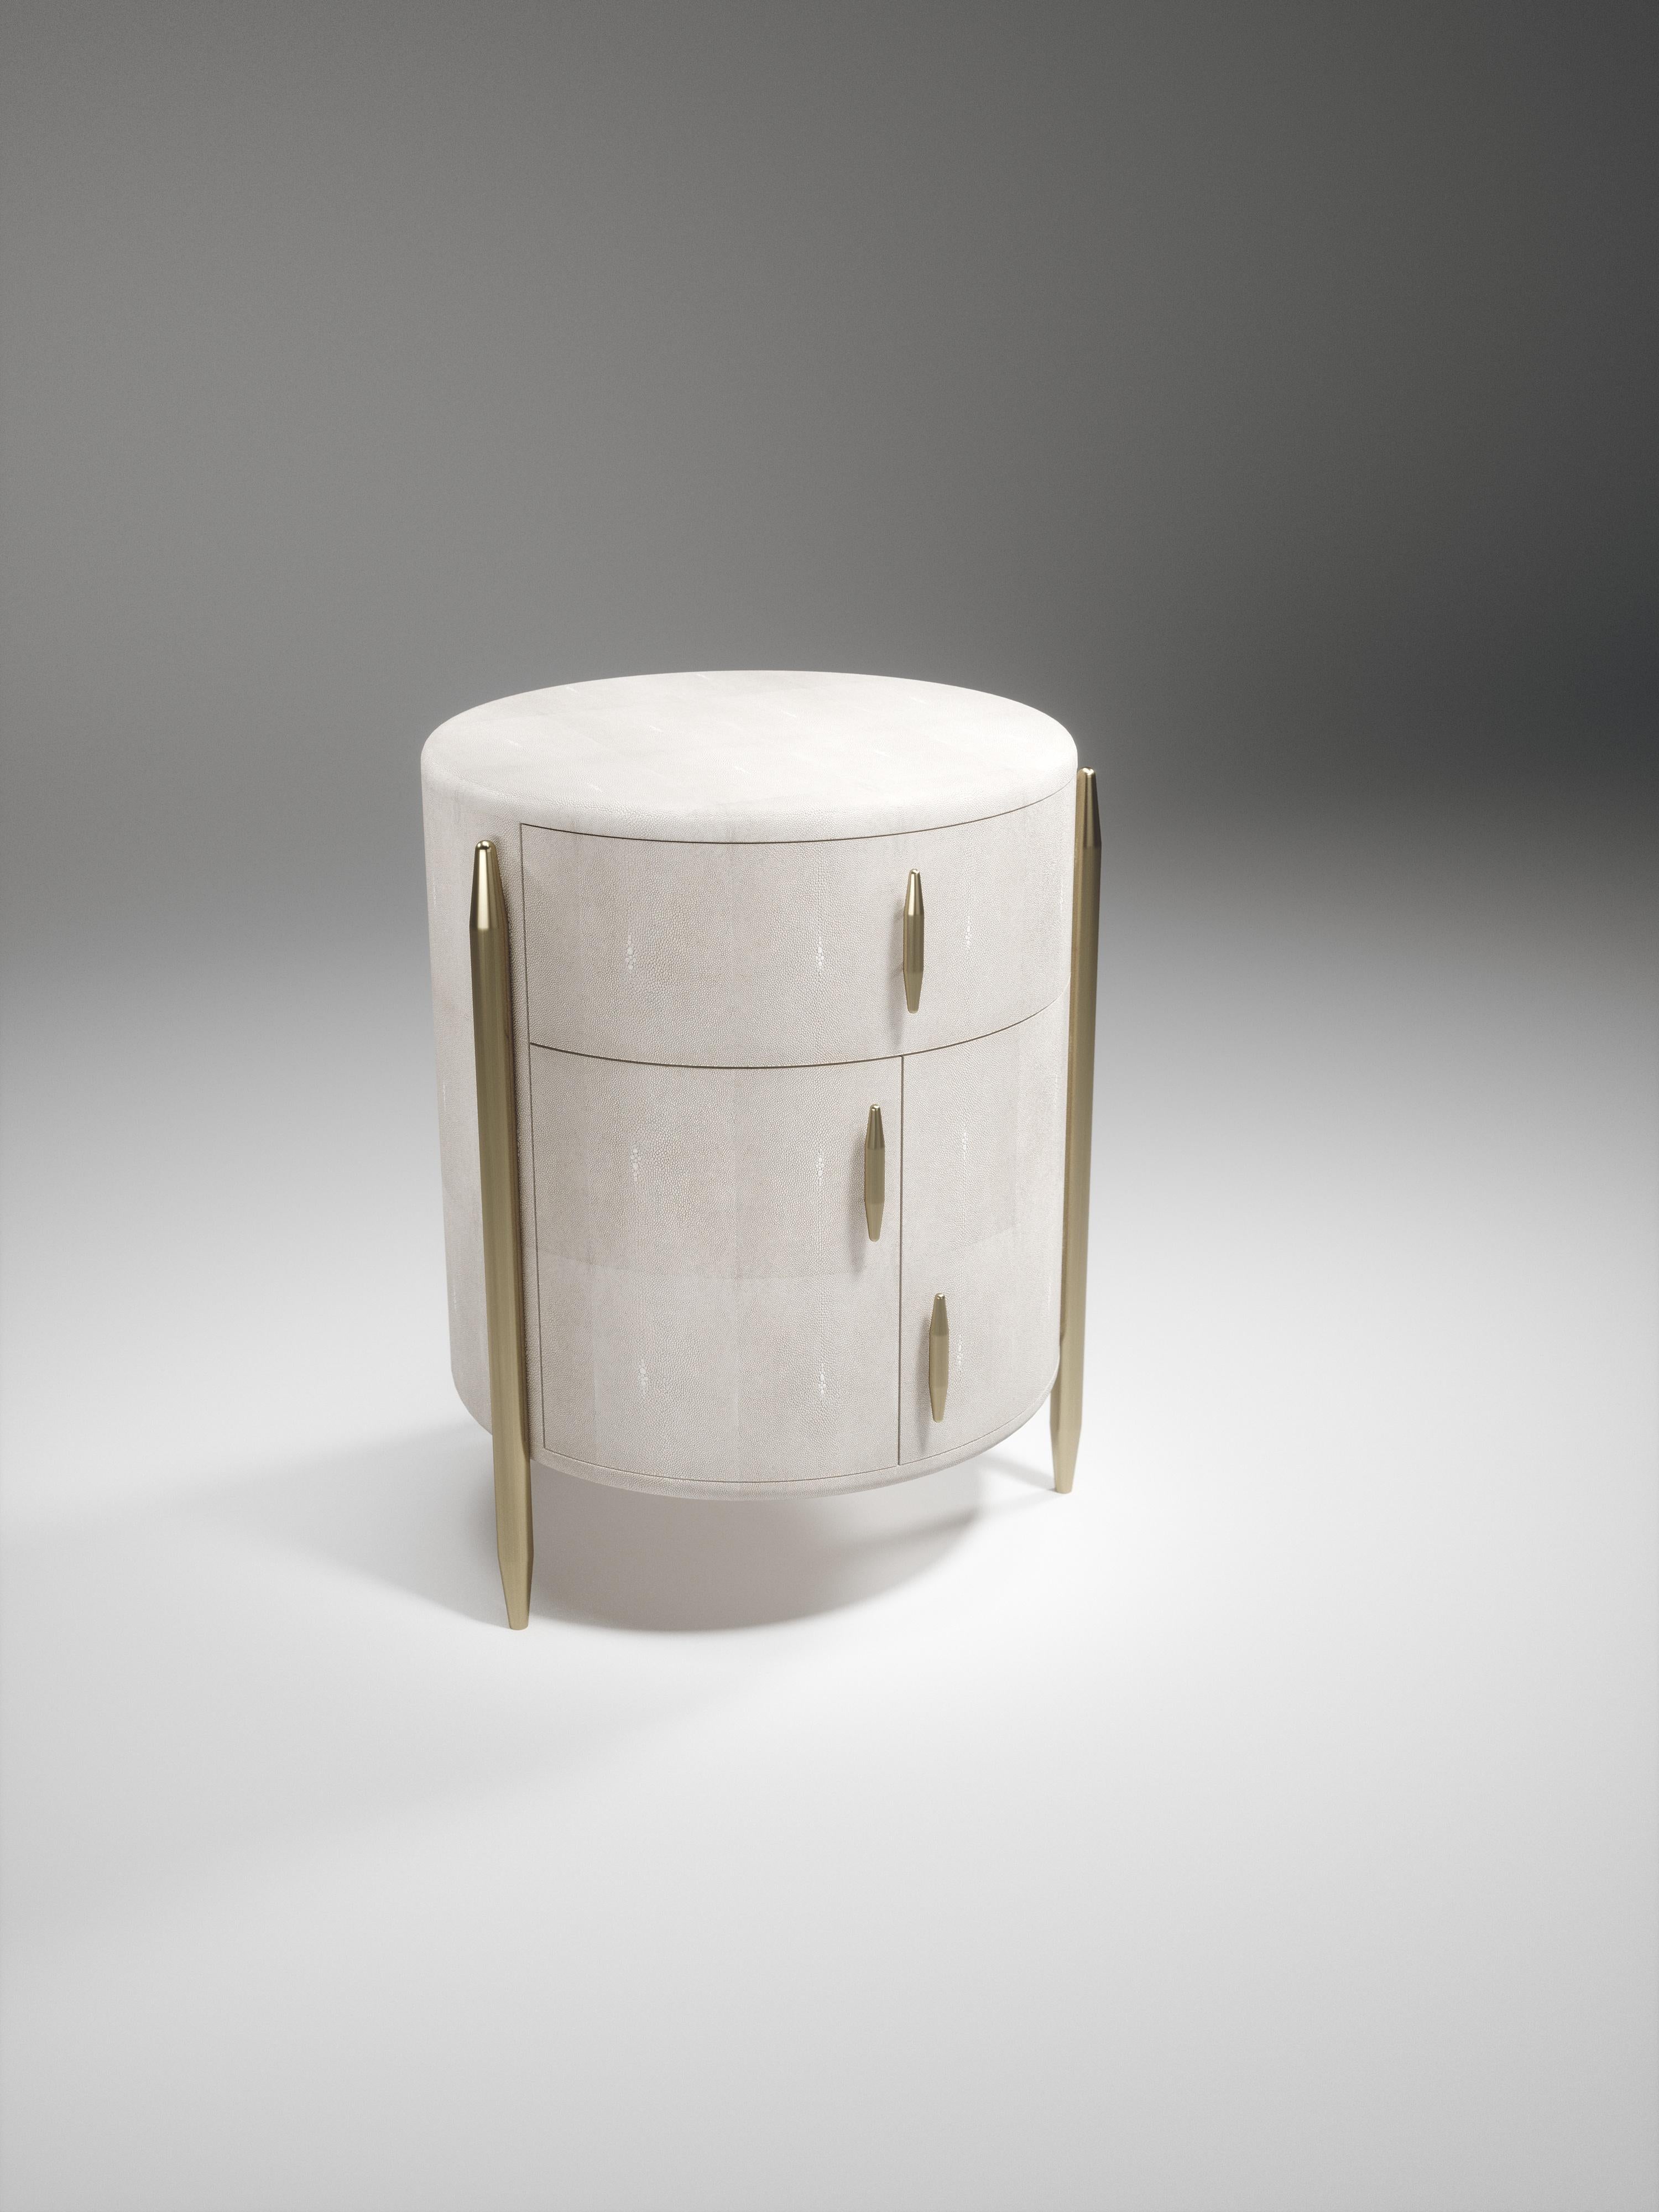 The Dandy round bedside table by Kifu Paris is an elegant and a luxurious home accent, inlaid in cream shagreen with bronze-patina brass details. This piece includes 1 drawer total and a cabinet below; the interiors are inlaid in gemelina wood